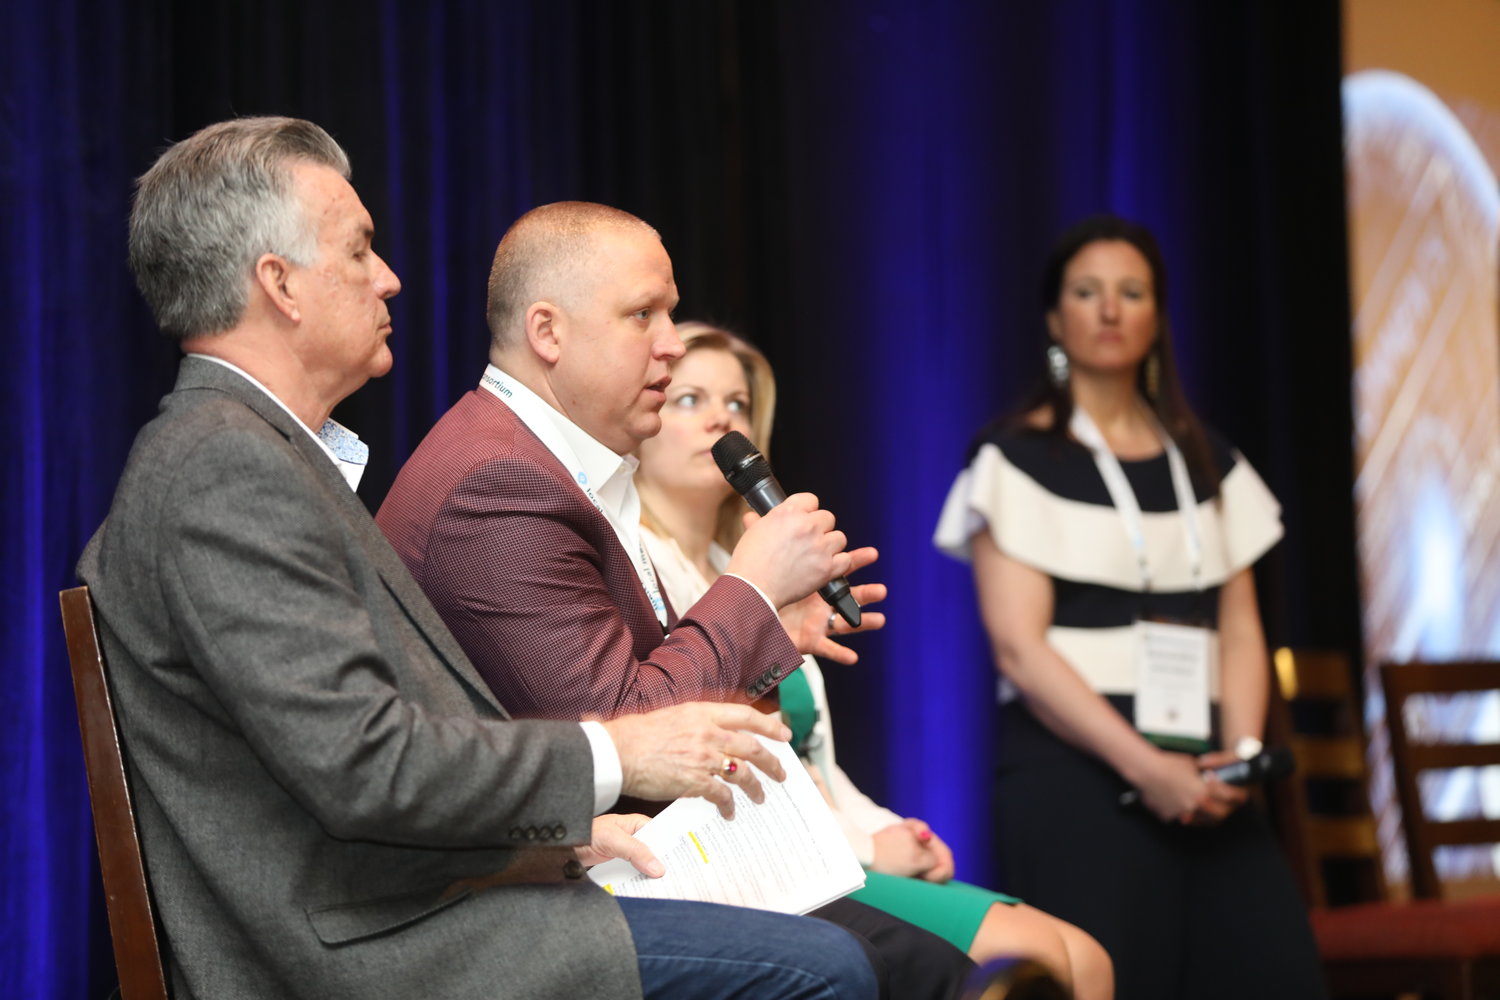 Revenue Strategies and Diversification: Howard Griffin, John Wulfert, Liz White and Samantha Johnston kick off the 2020 Mega-Conference. (Photo by Bob Booth)